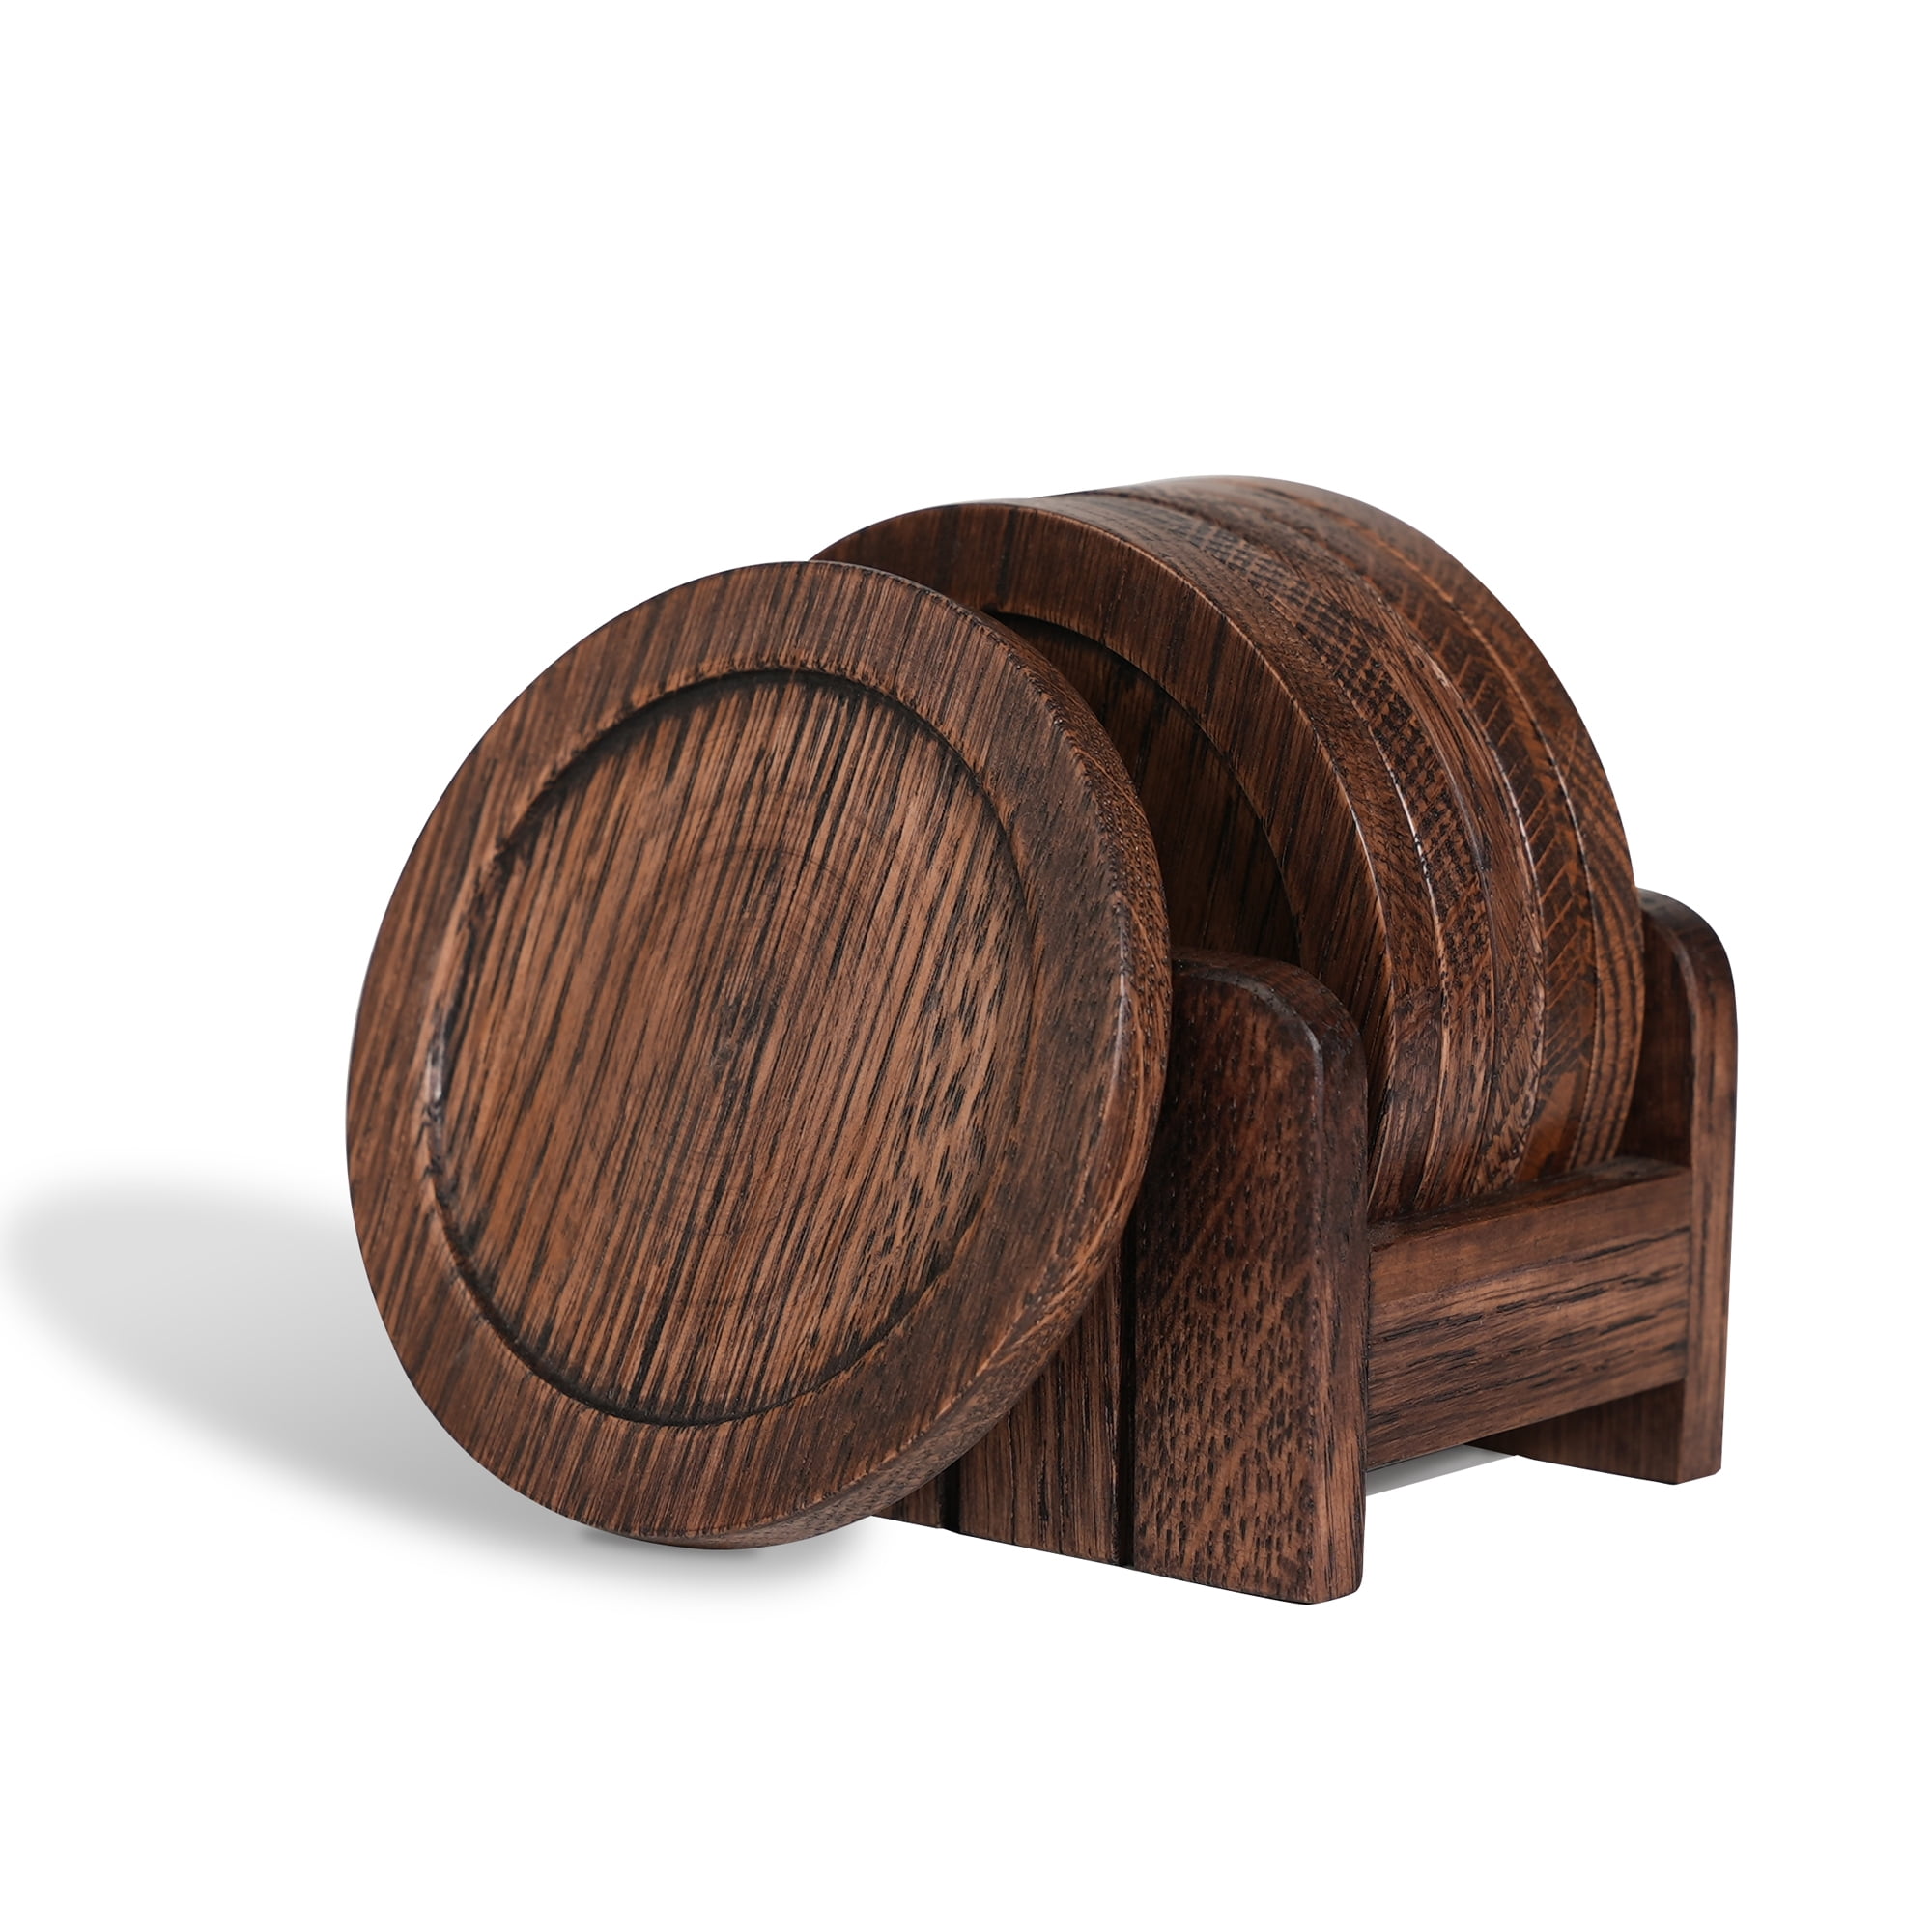 Wood Coaster Sets - Unique Rustic Wood Coasters for Drinks - Drink Cup  Coaster Set at Rs 85/set, Wooden Coasters in Saharanpur